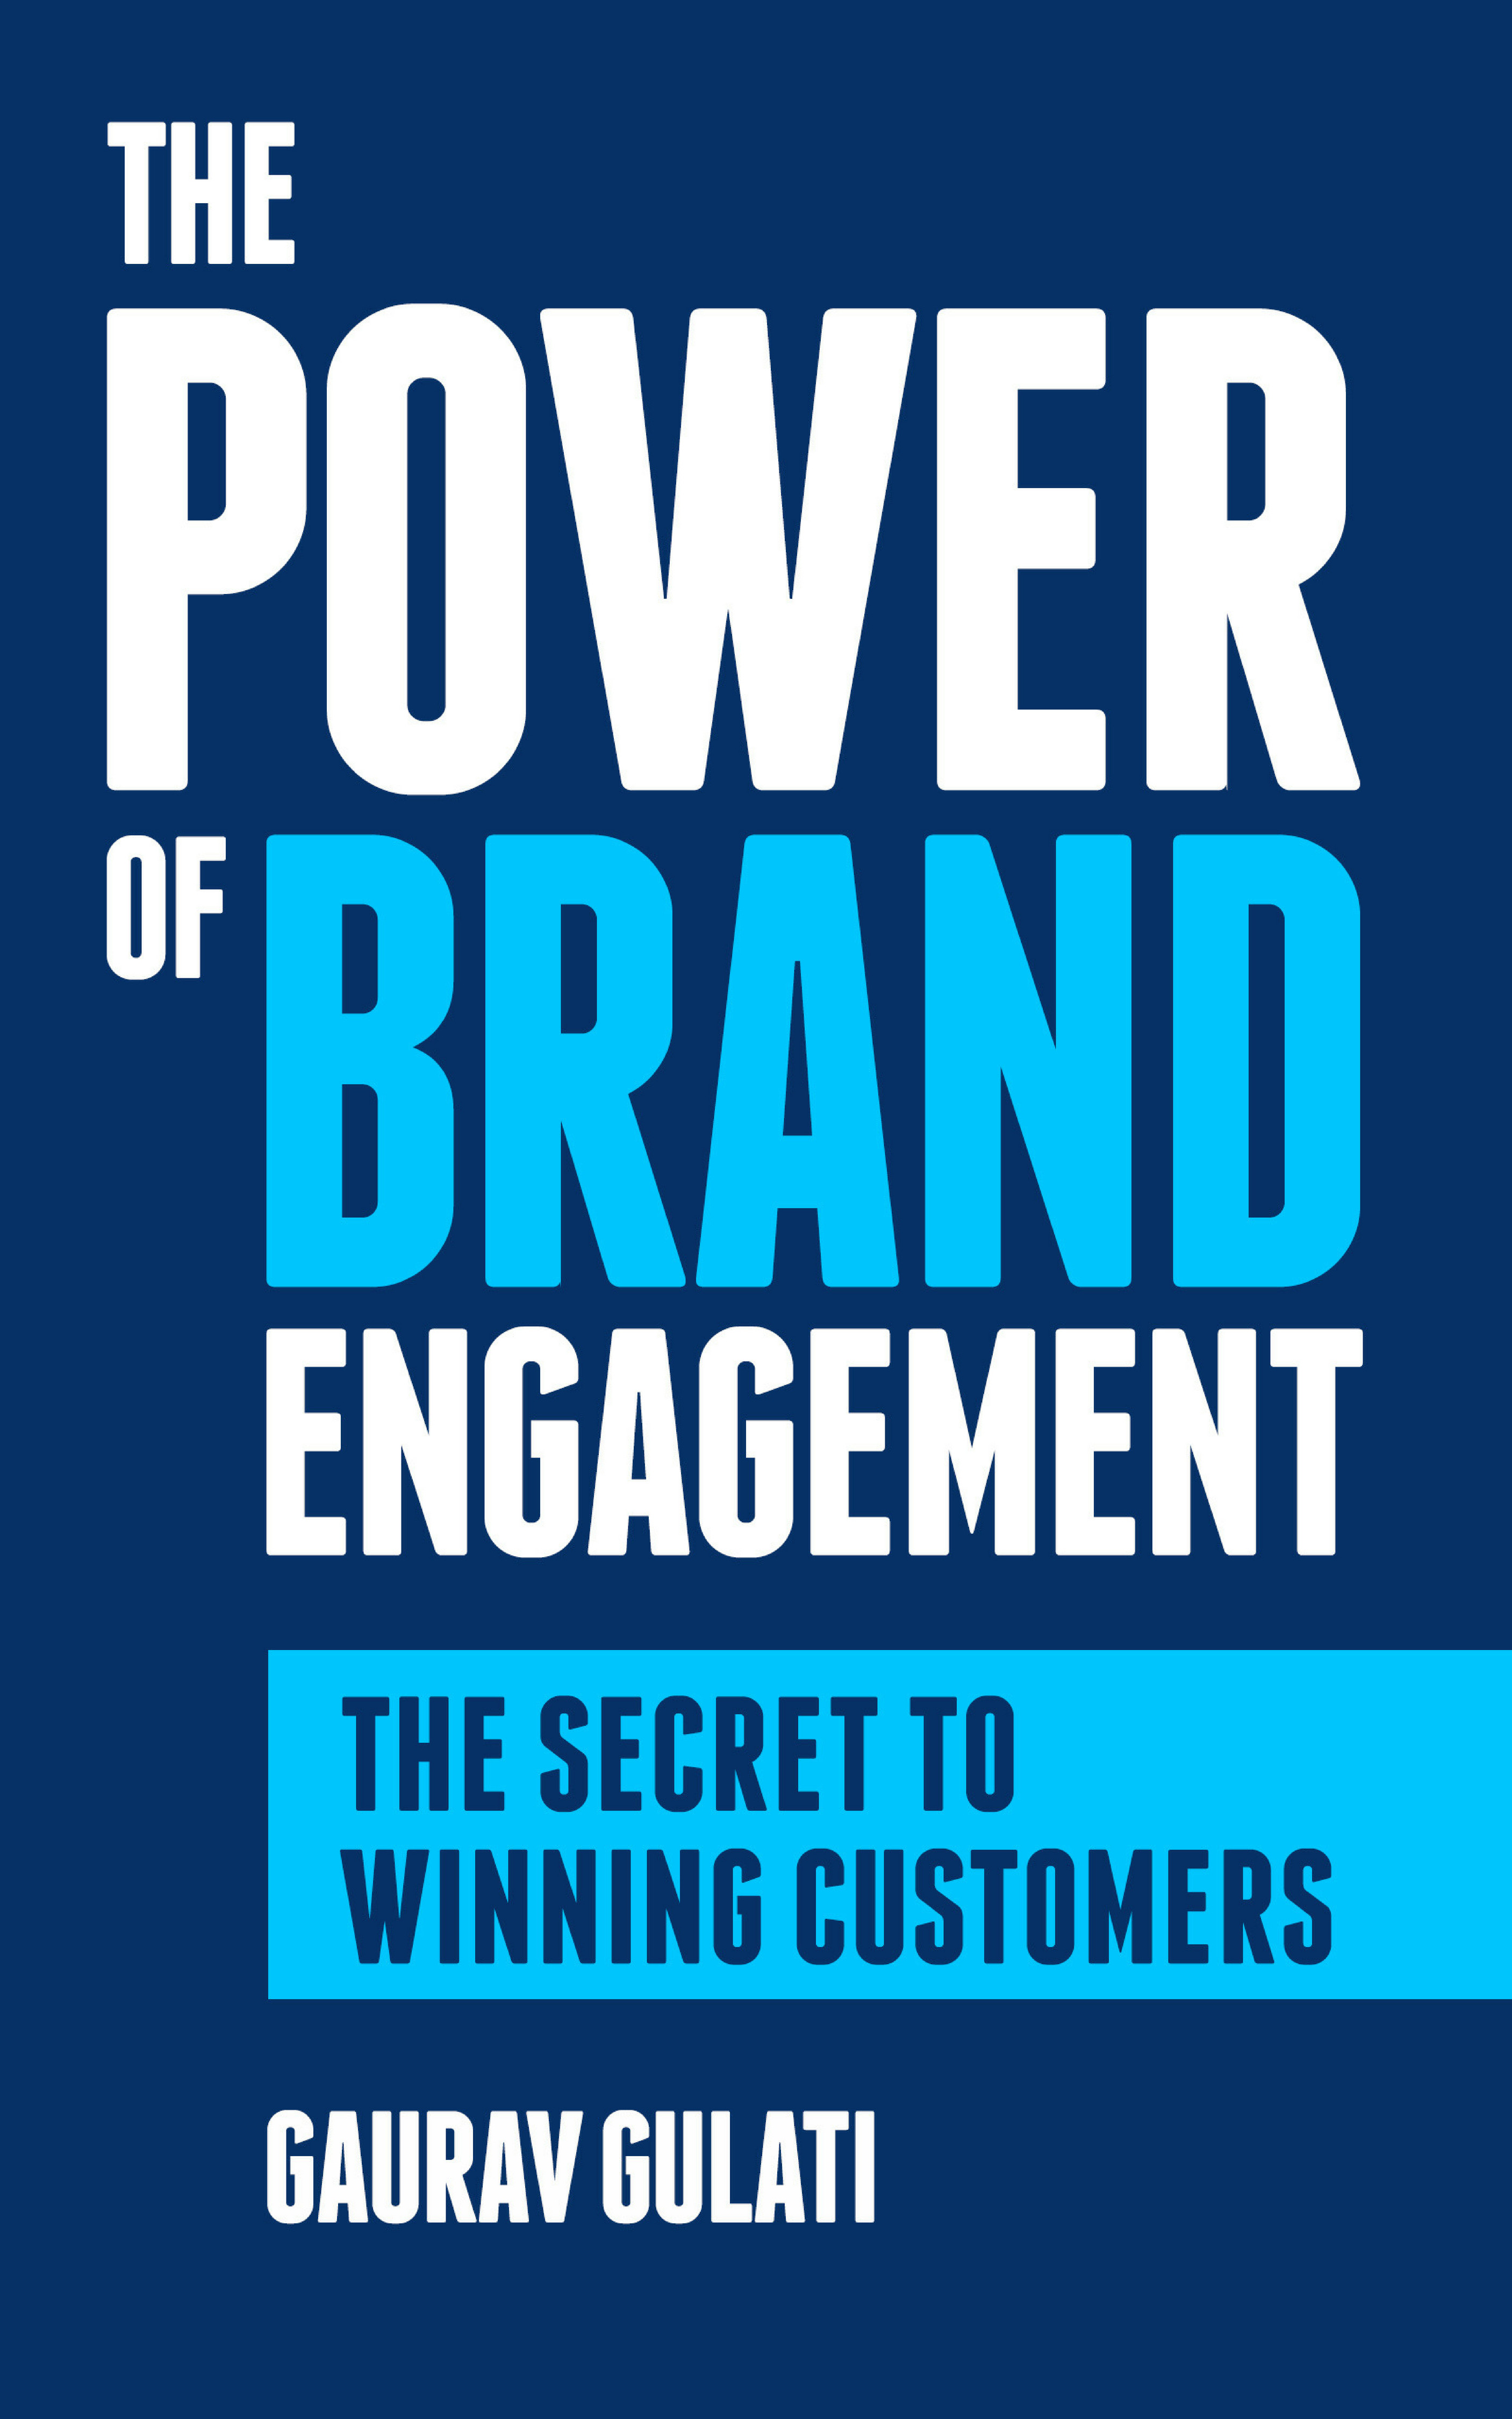 Power of brand engagement